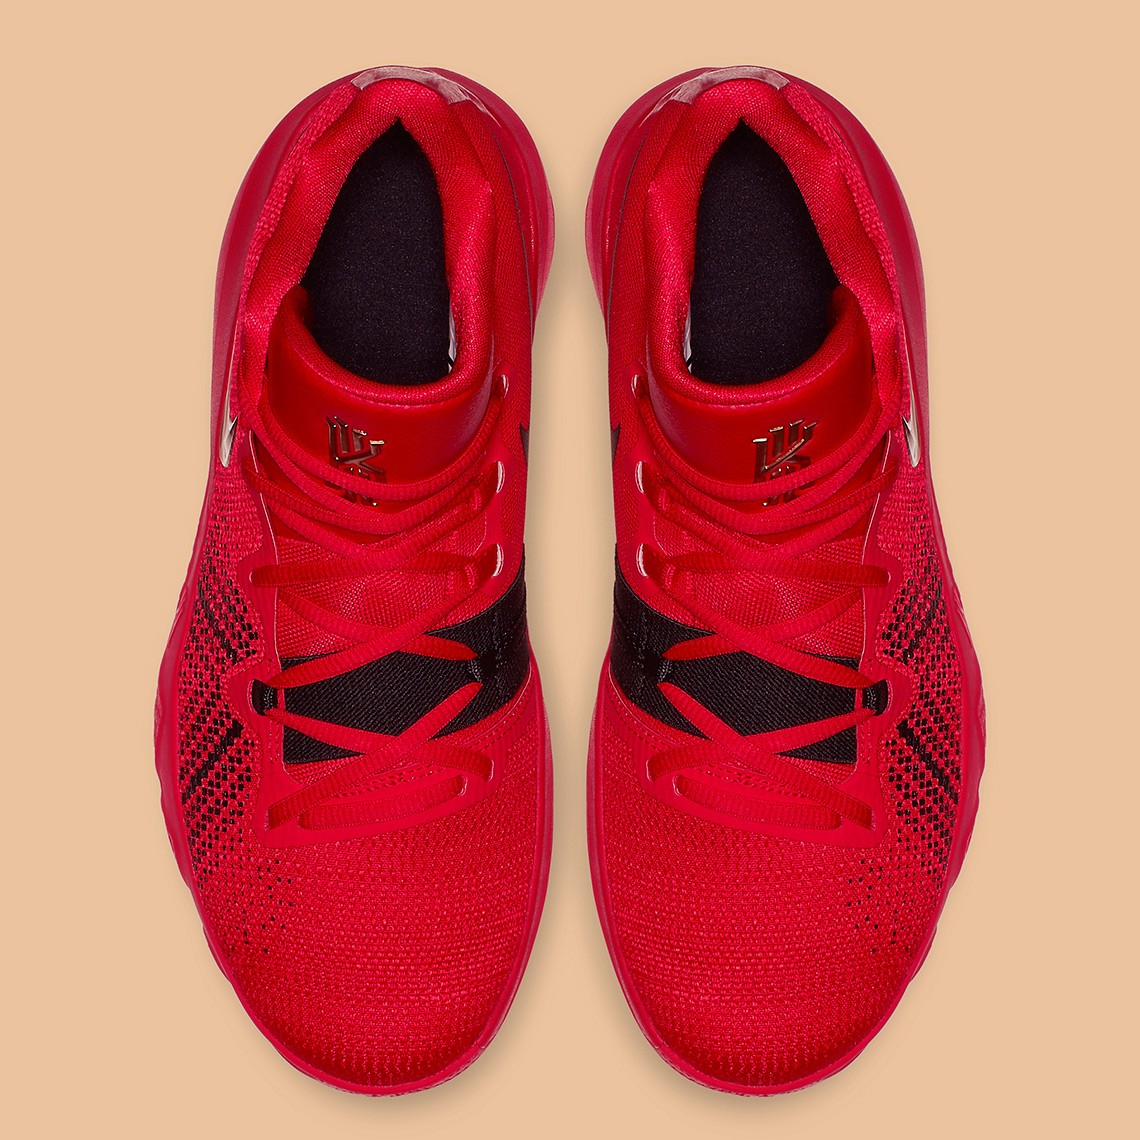 kyrie irving flytrap red and gold